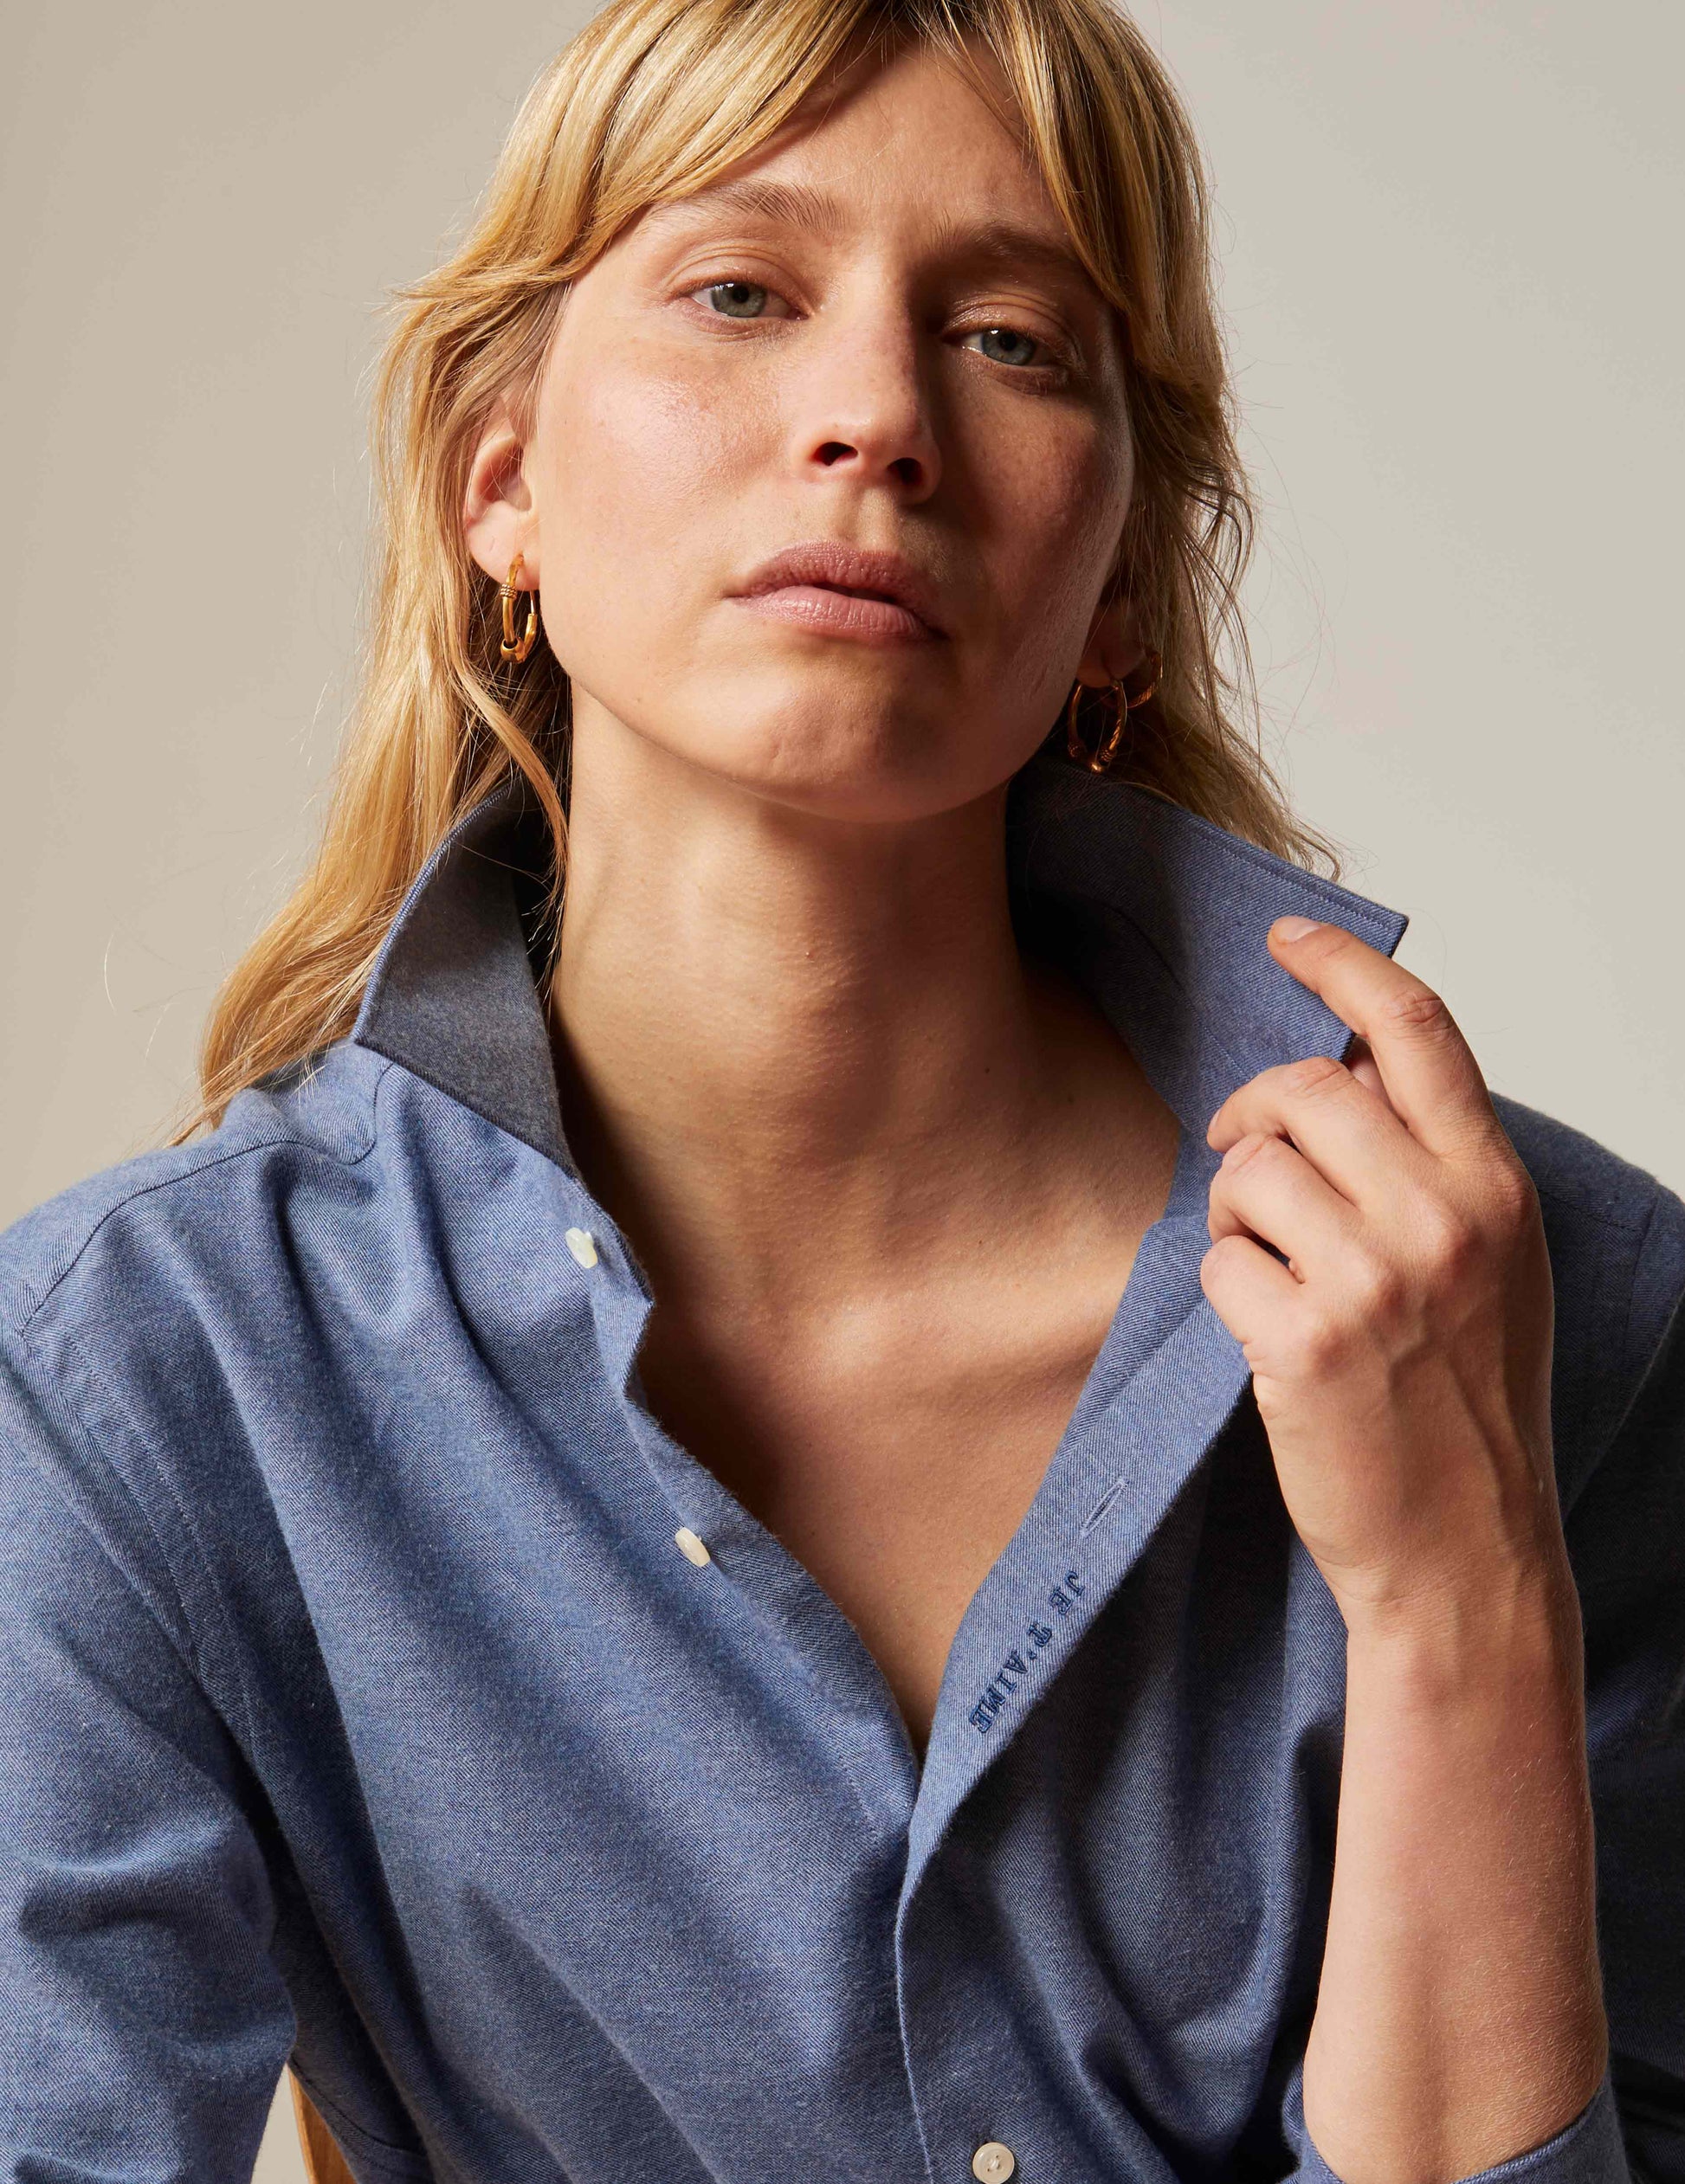 Blue cotton and cashmere "Je t'aime" shirt with navy embroidery - Flannel - Figaret Collar